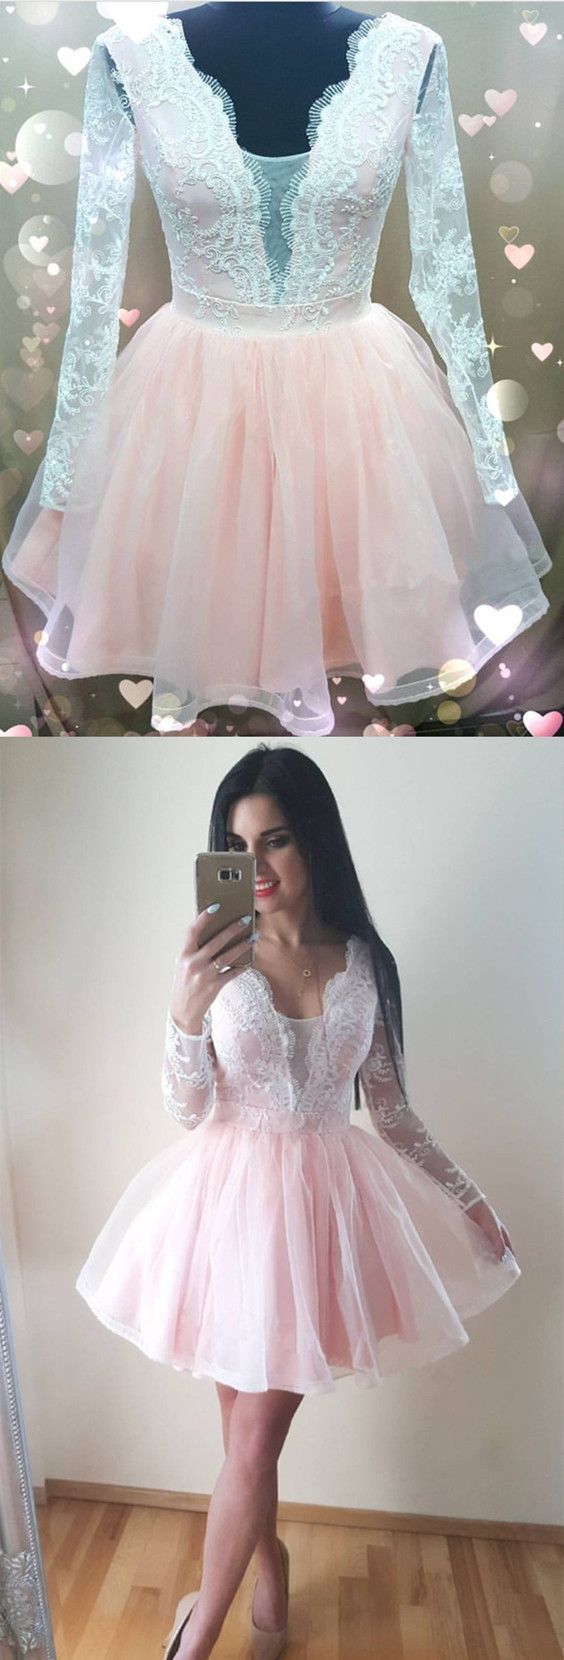 Cute A-line Blush Pink Tulle Homecoming Dresses Long Sleeves Prom Short ...